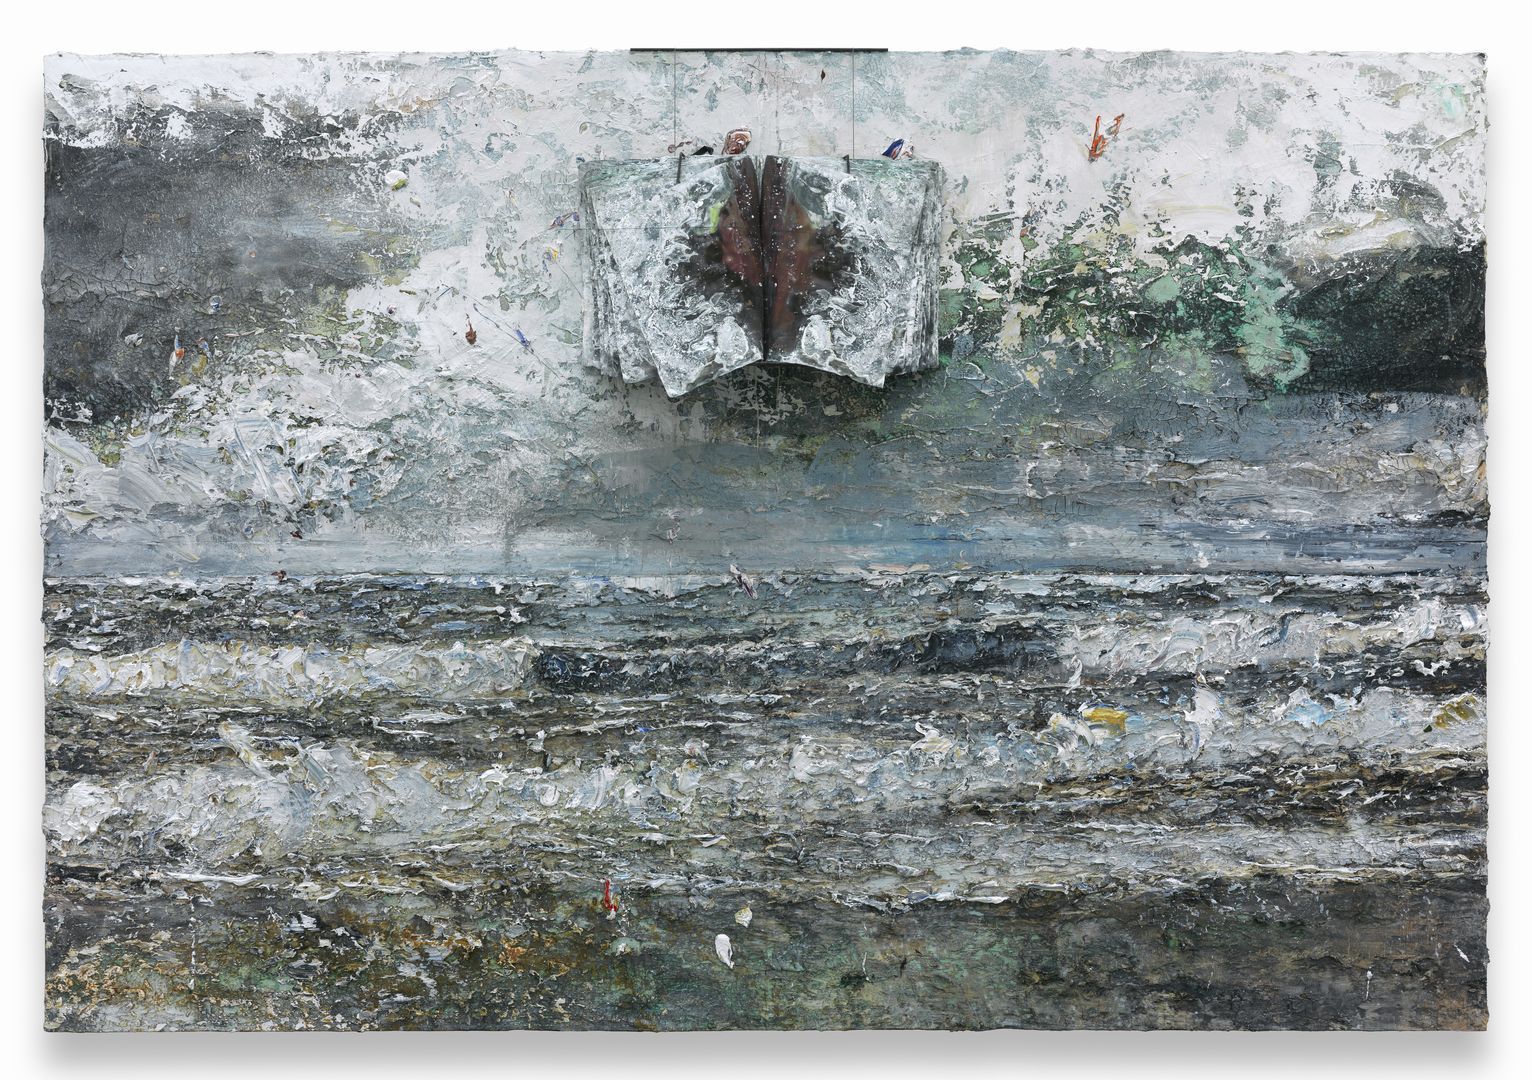 Ghost over the Waters by Anselm Kiefer. Photo: Charles Duprat. Image courtesy of the Hermitage